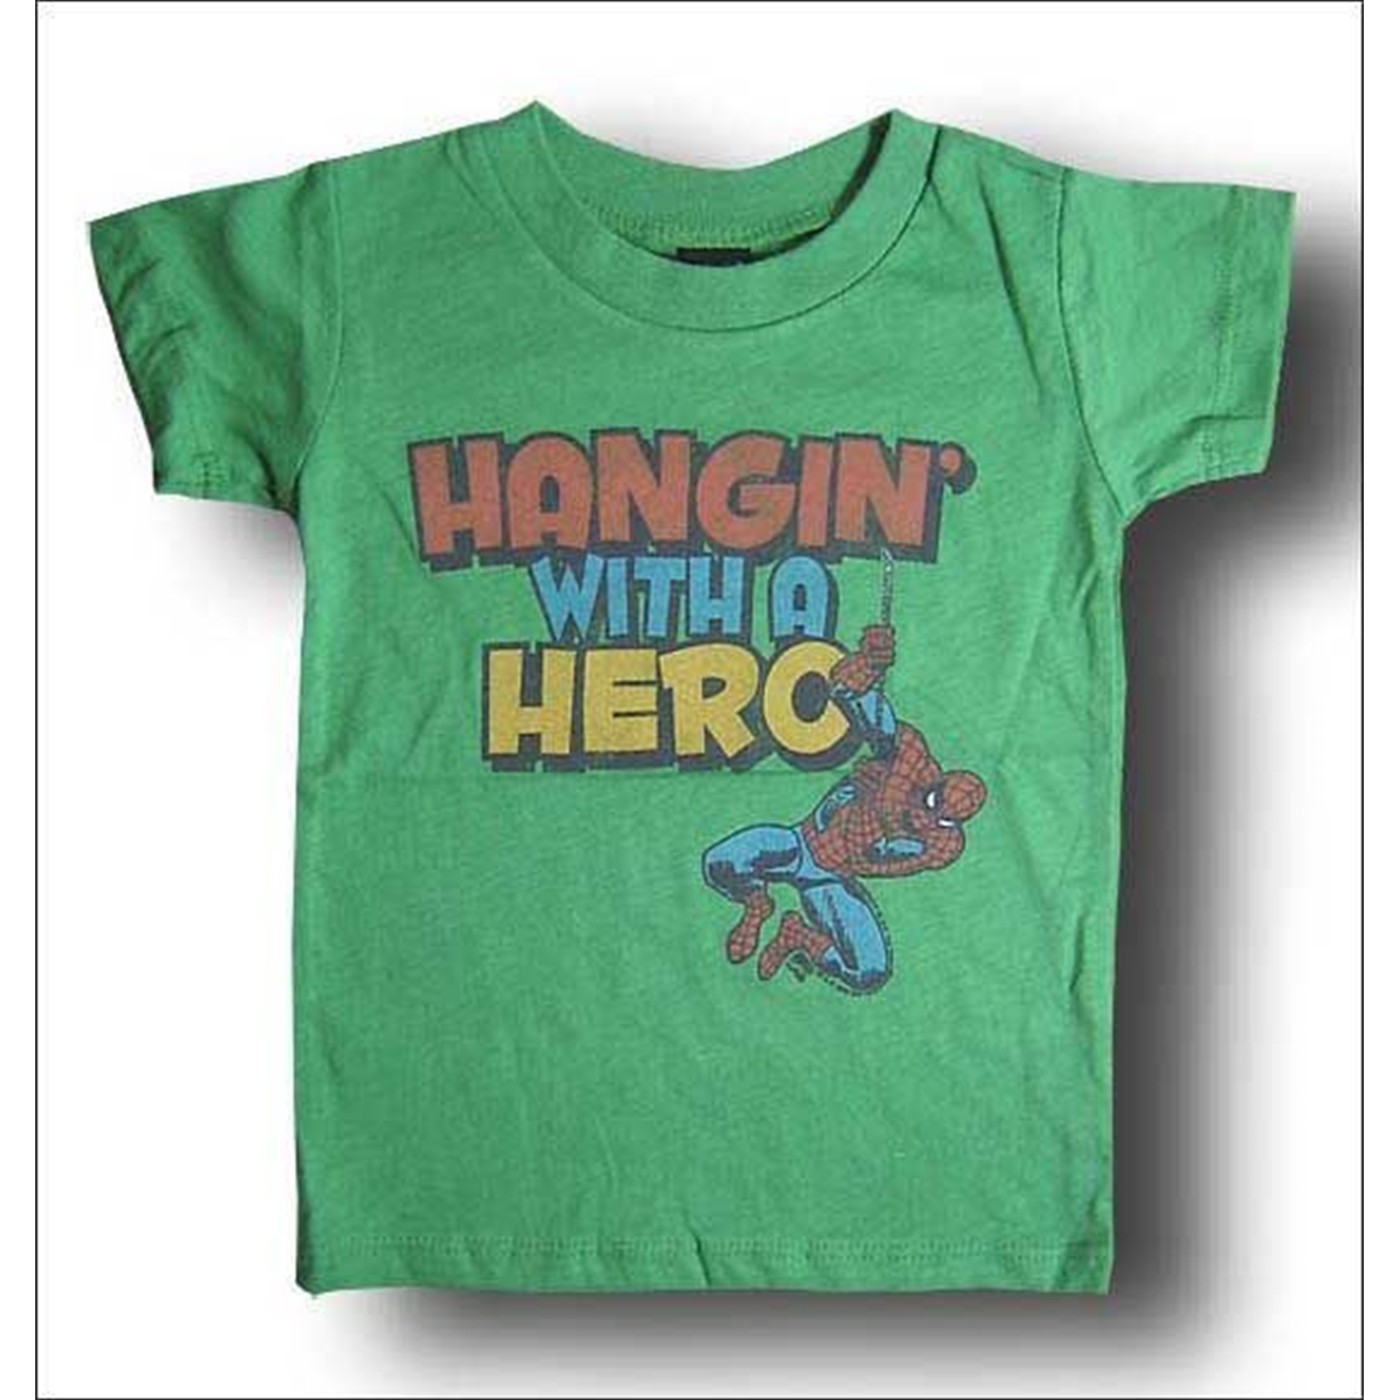 Spiderman Toddler Hanging with Hero T-Shirt by Junkfood